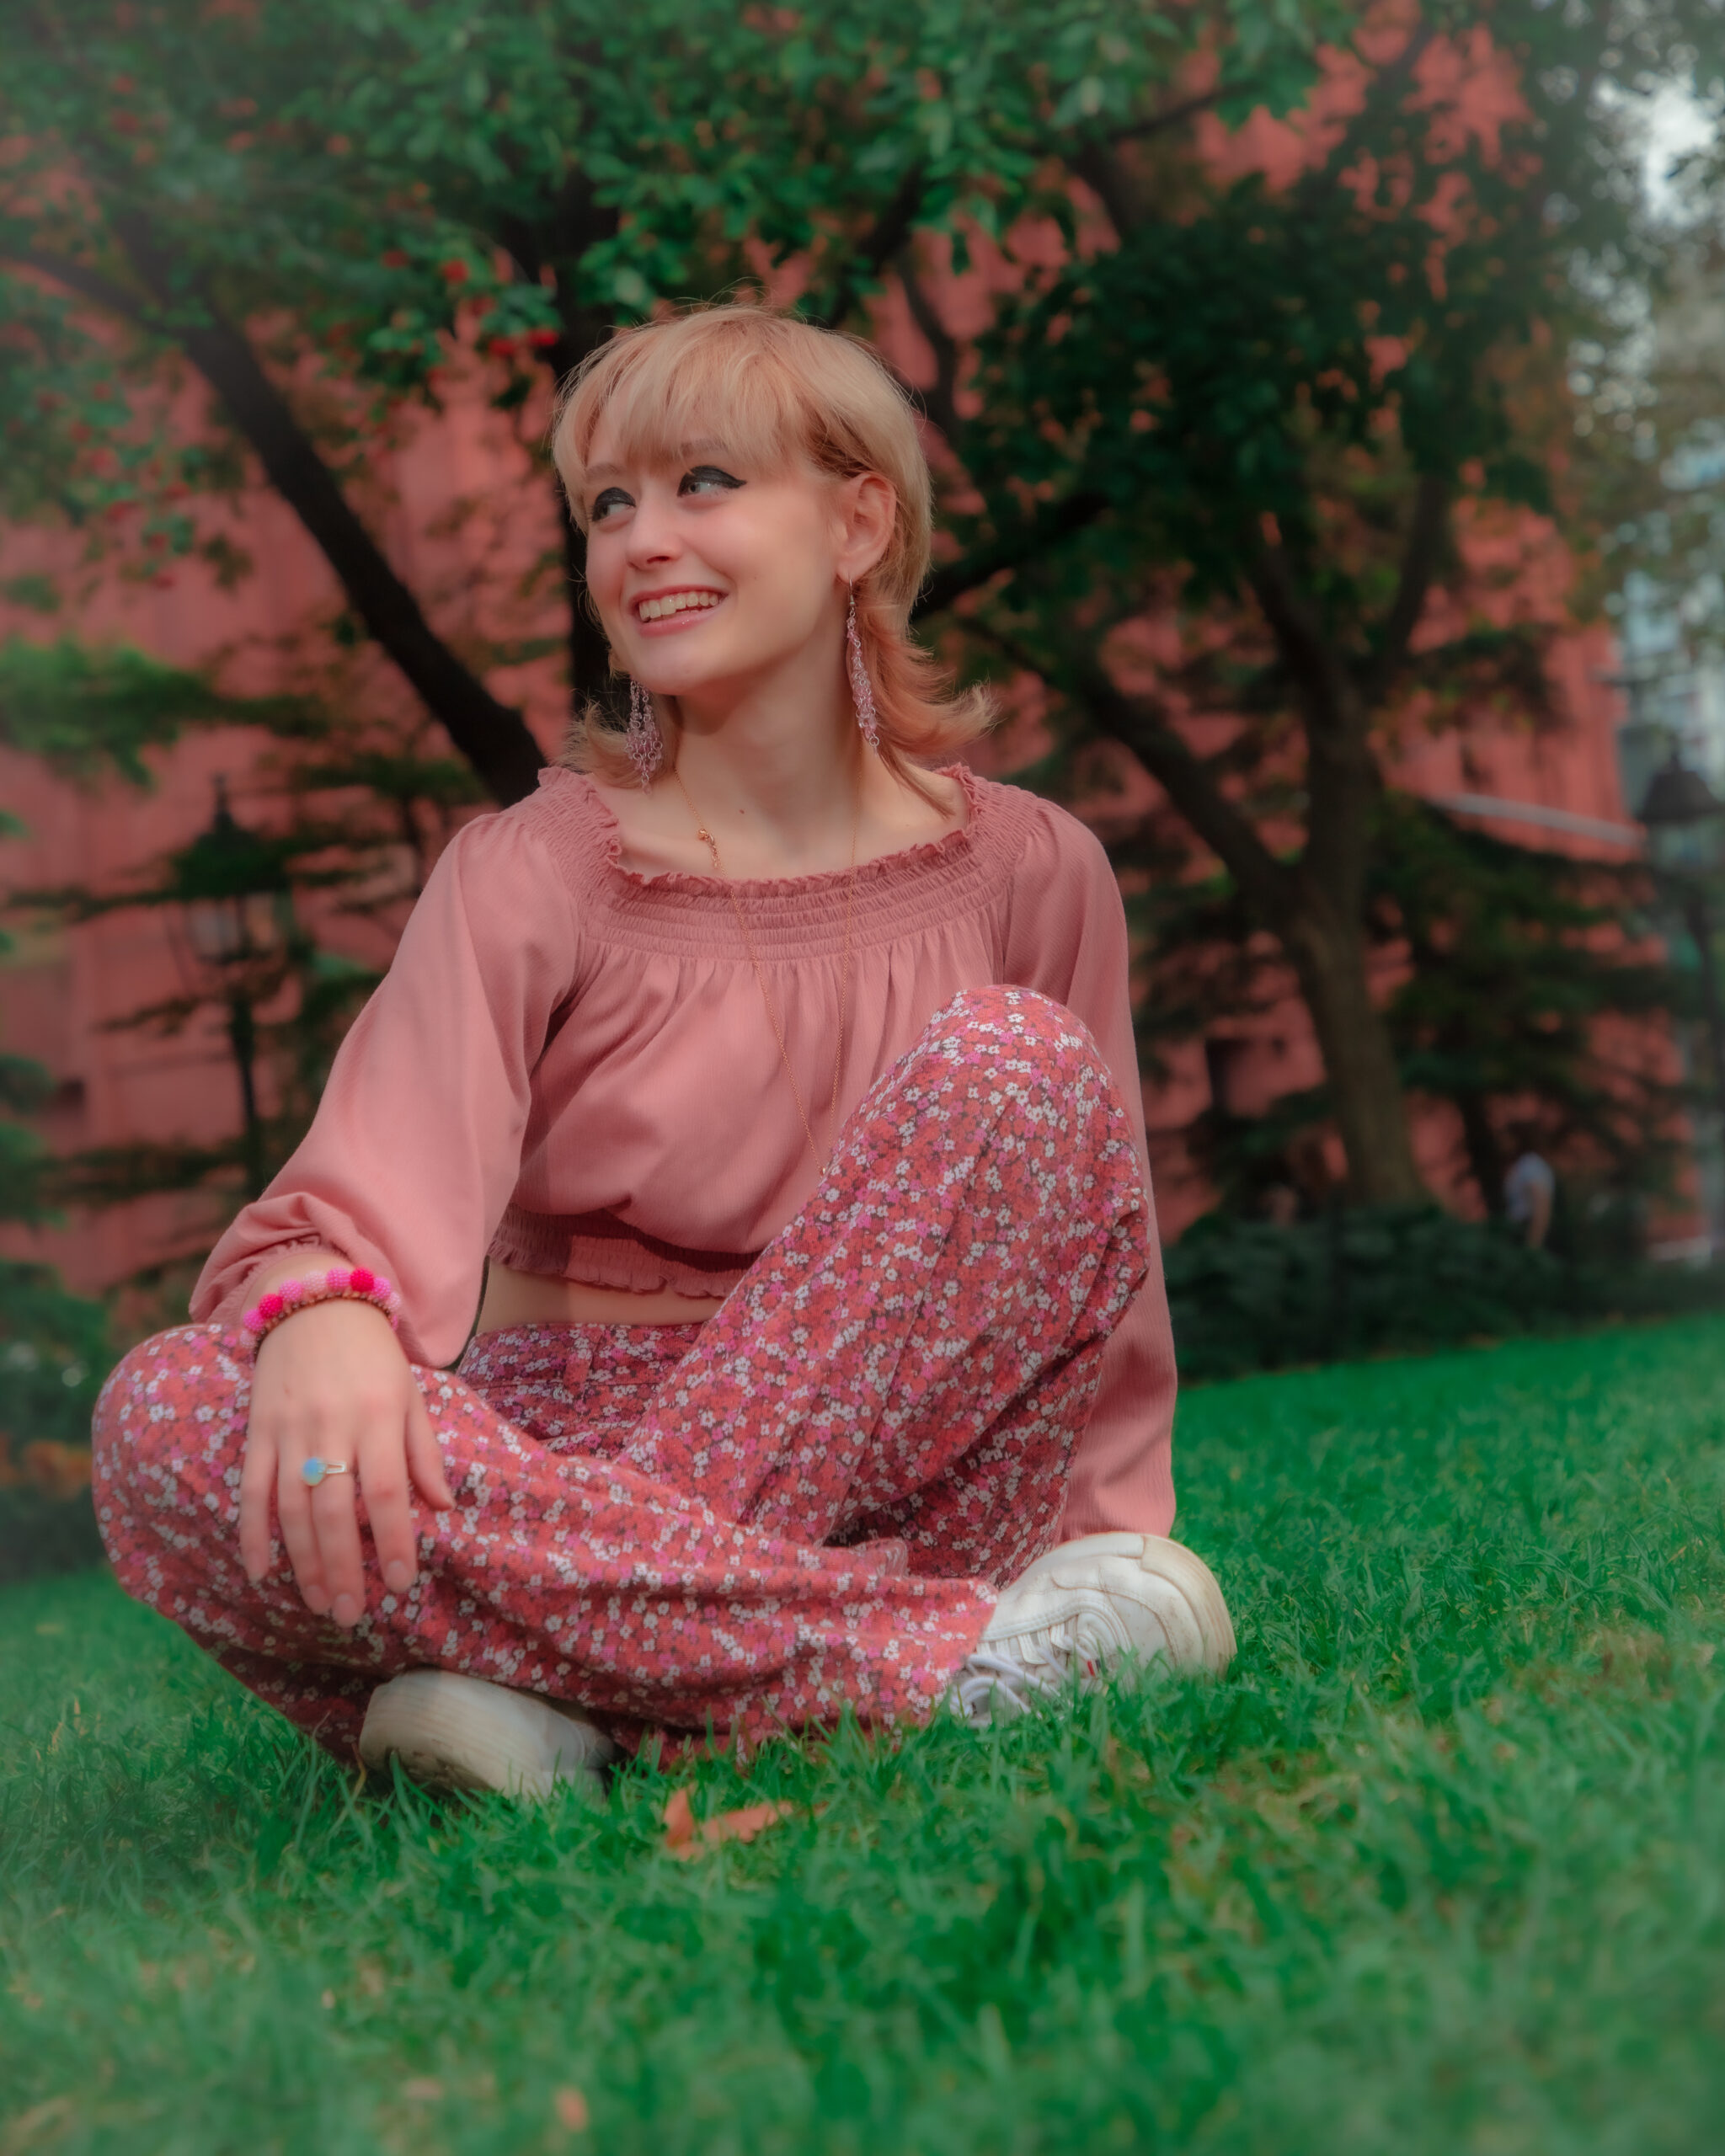 The image displays a woman sitting cross-legged on grass, with a smiling expression and looking upwards to her right. She has blonde hair with bangs, and she's wearing a pink blouse paired with floral-patterned trousers. She has on white sneakers and is adorned with earrings and a ring. The background features green foliage and a reddish-pink building, which together with the woman's attire and the green grass, creates a colorful and relaxed outdoor setting